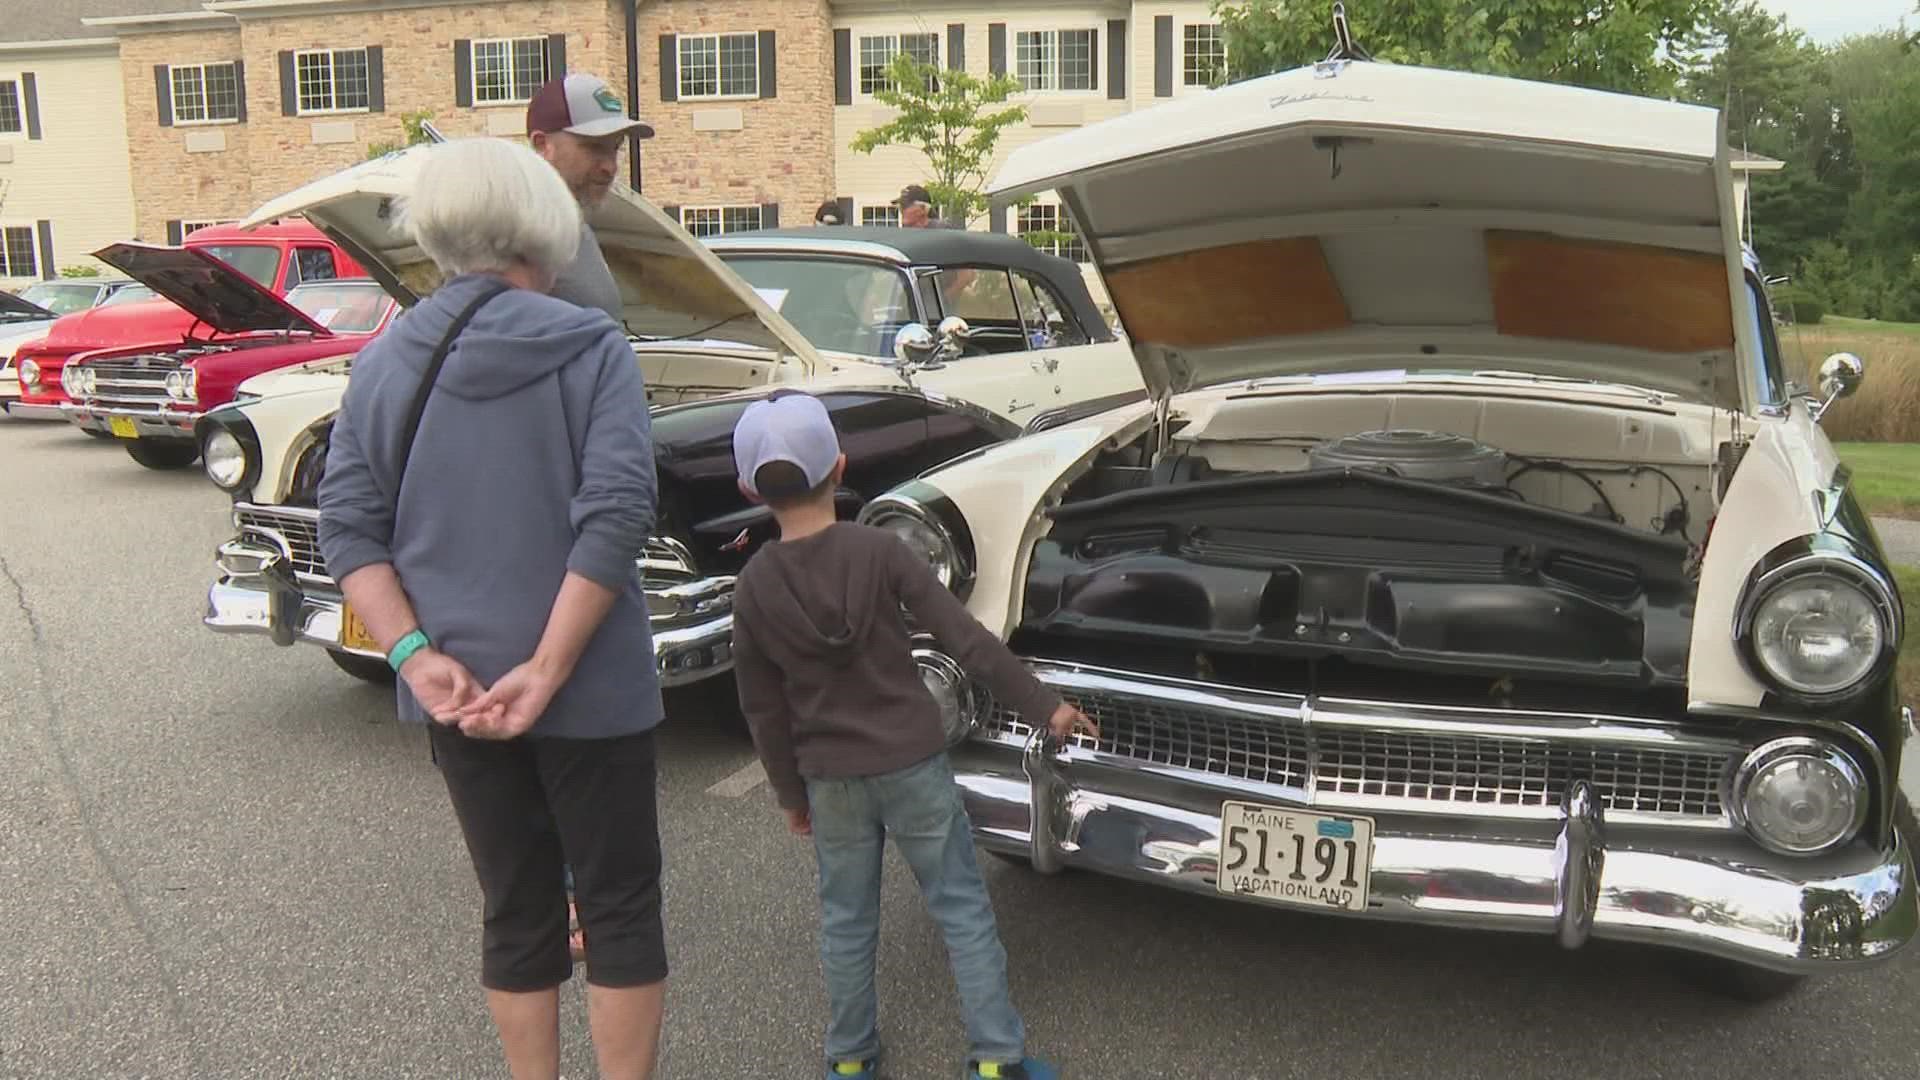 The Enclave of Scarborough hosted its 7th annual Classic Car Show on Thursday. With dozens of cars on display, food, and music, the event was a hit.